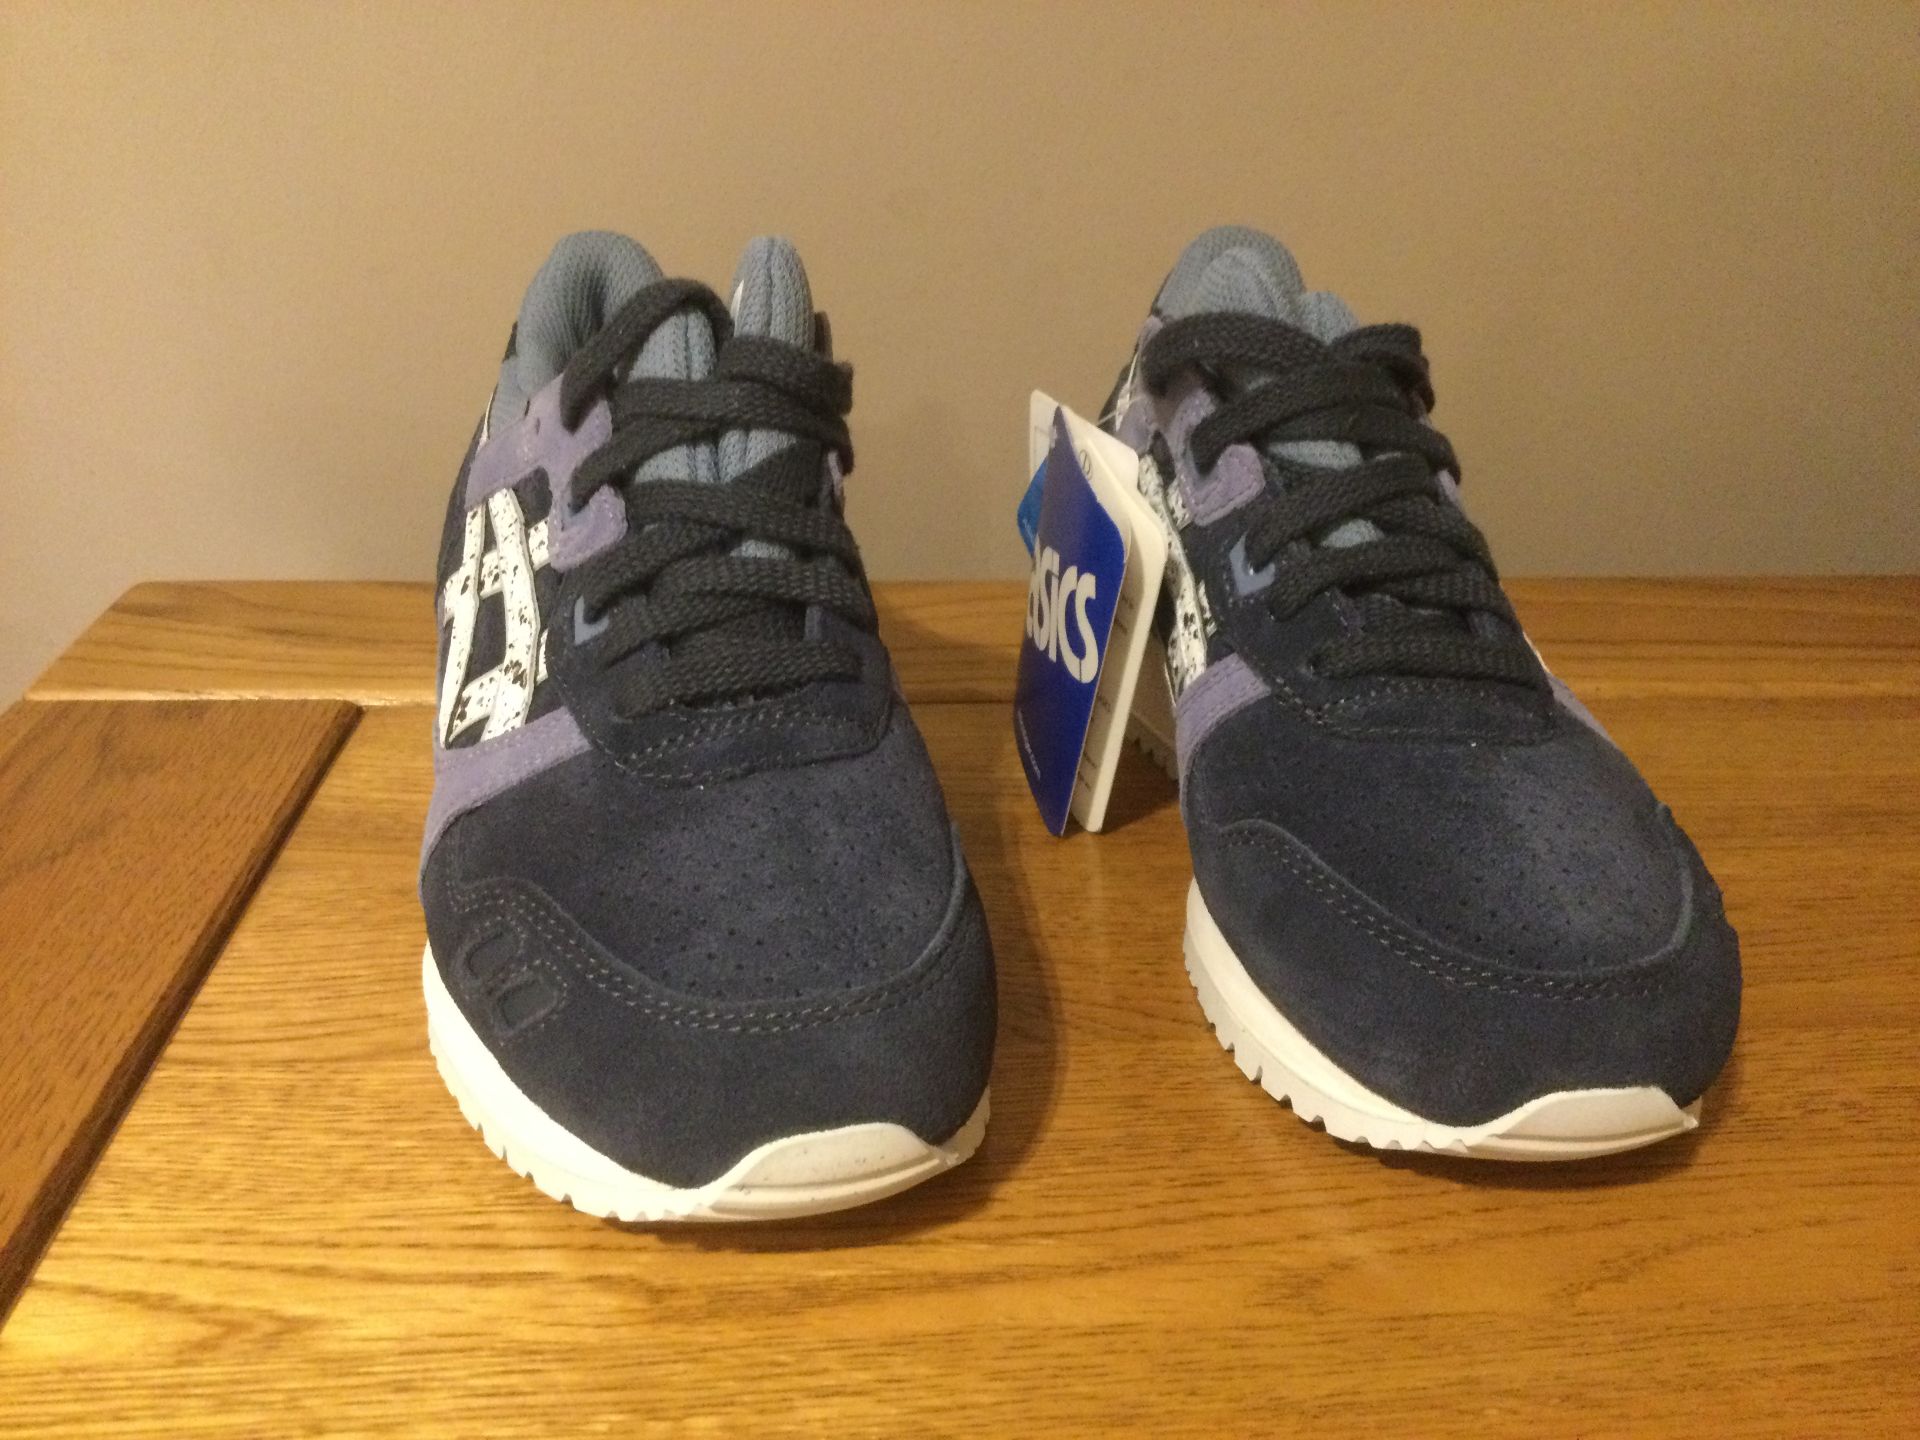 ASICS Gel-Lyte III, Ladies Trainers, Indian Ink, Size 3 - New RRP £95.00 - Image 5 of 7